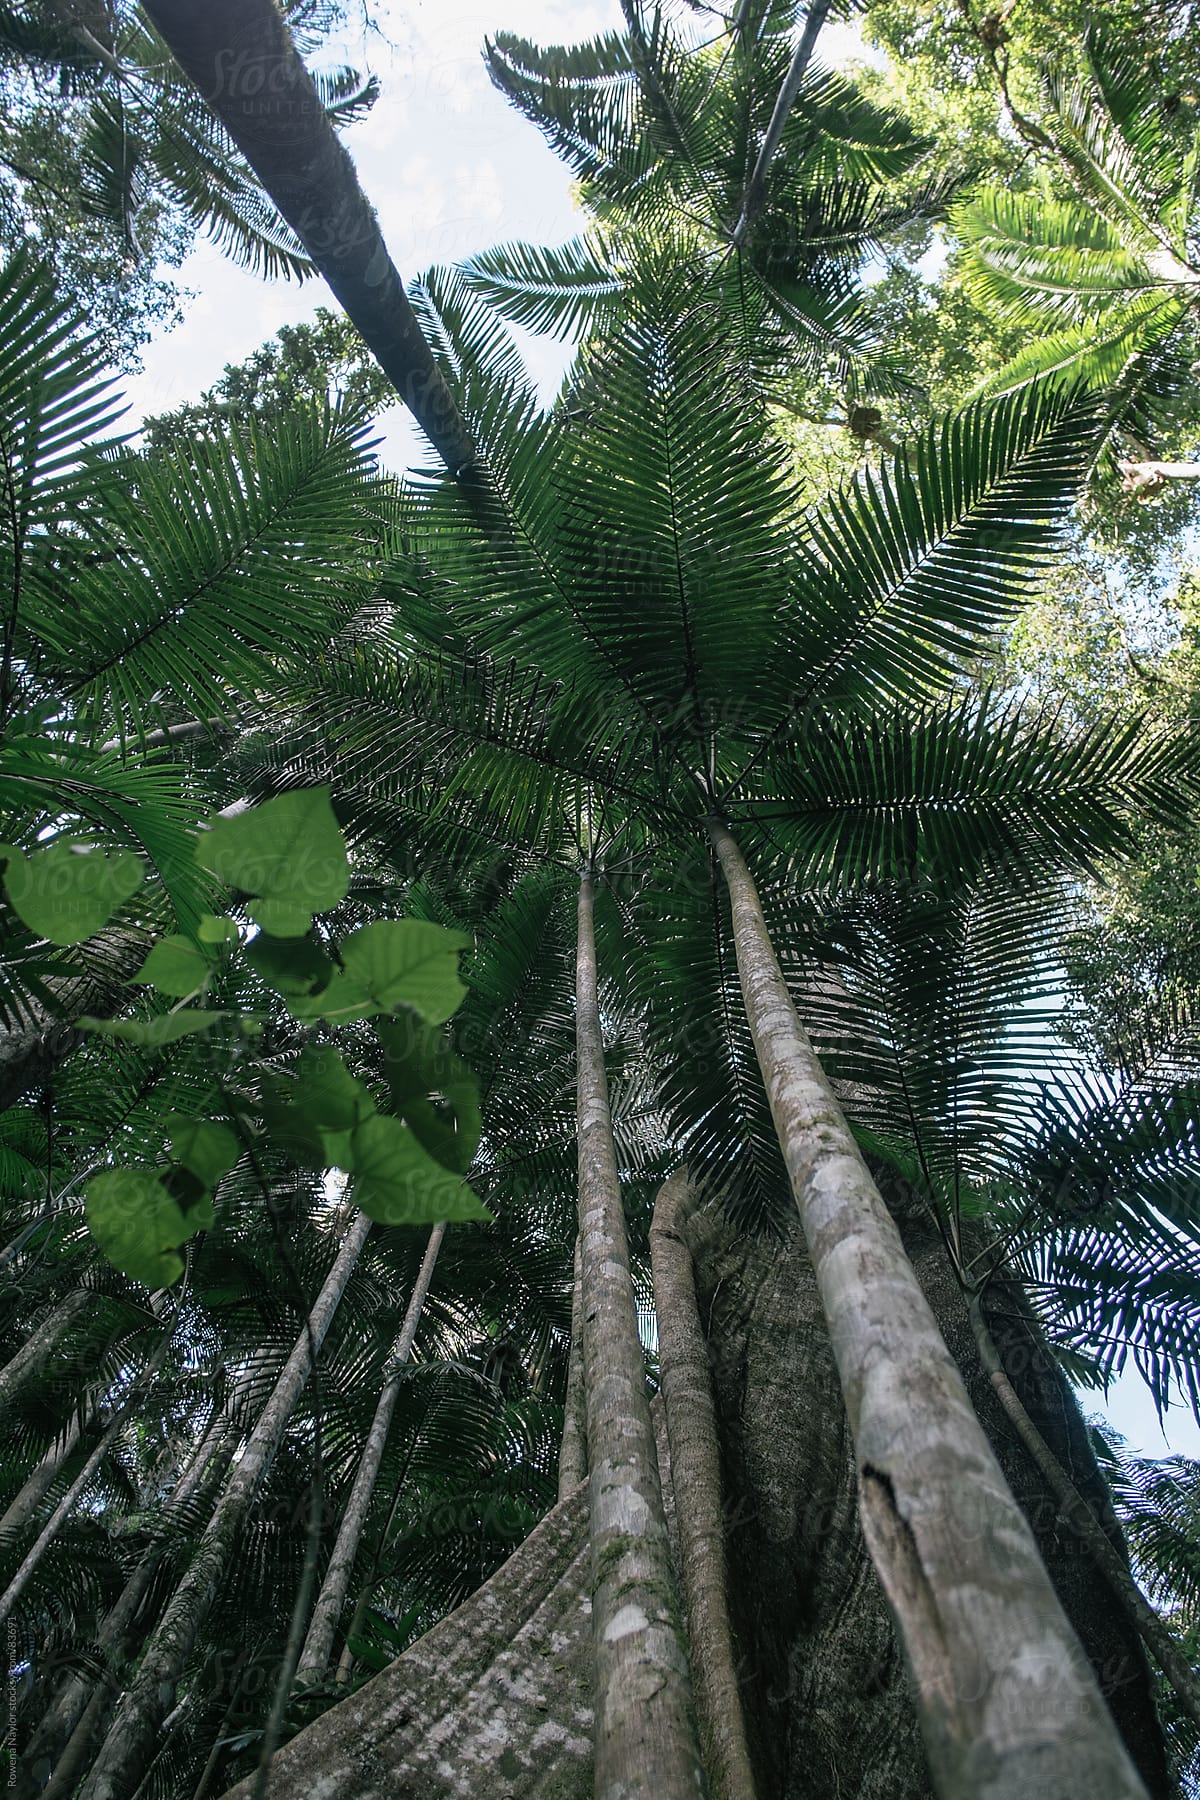 Tall Palms in natural rainforest